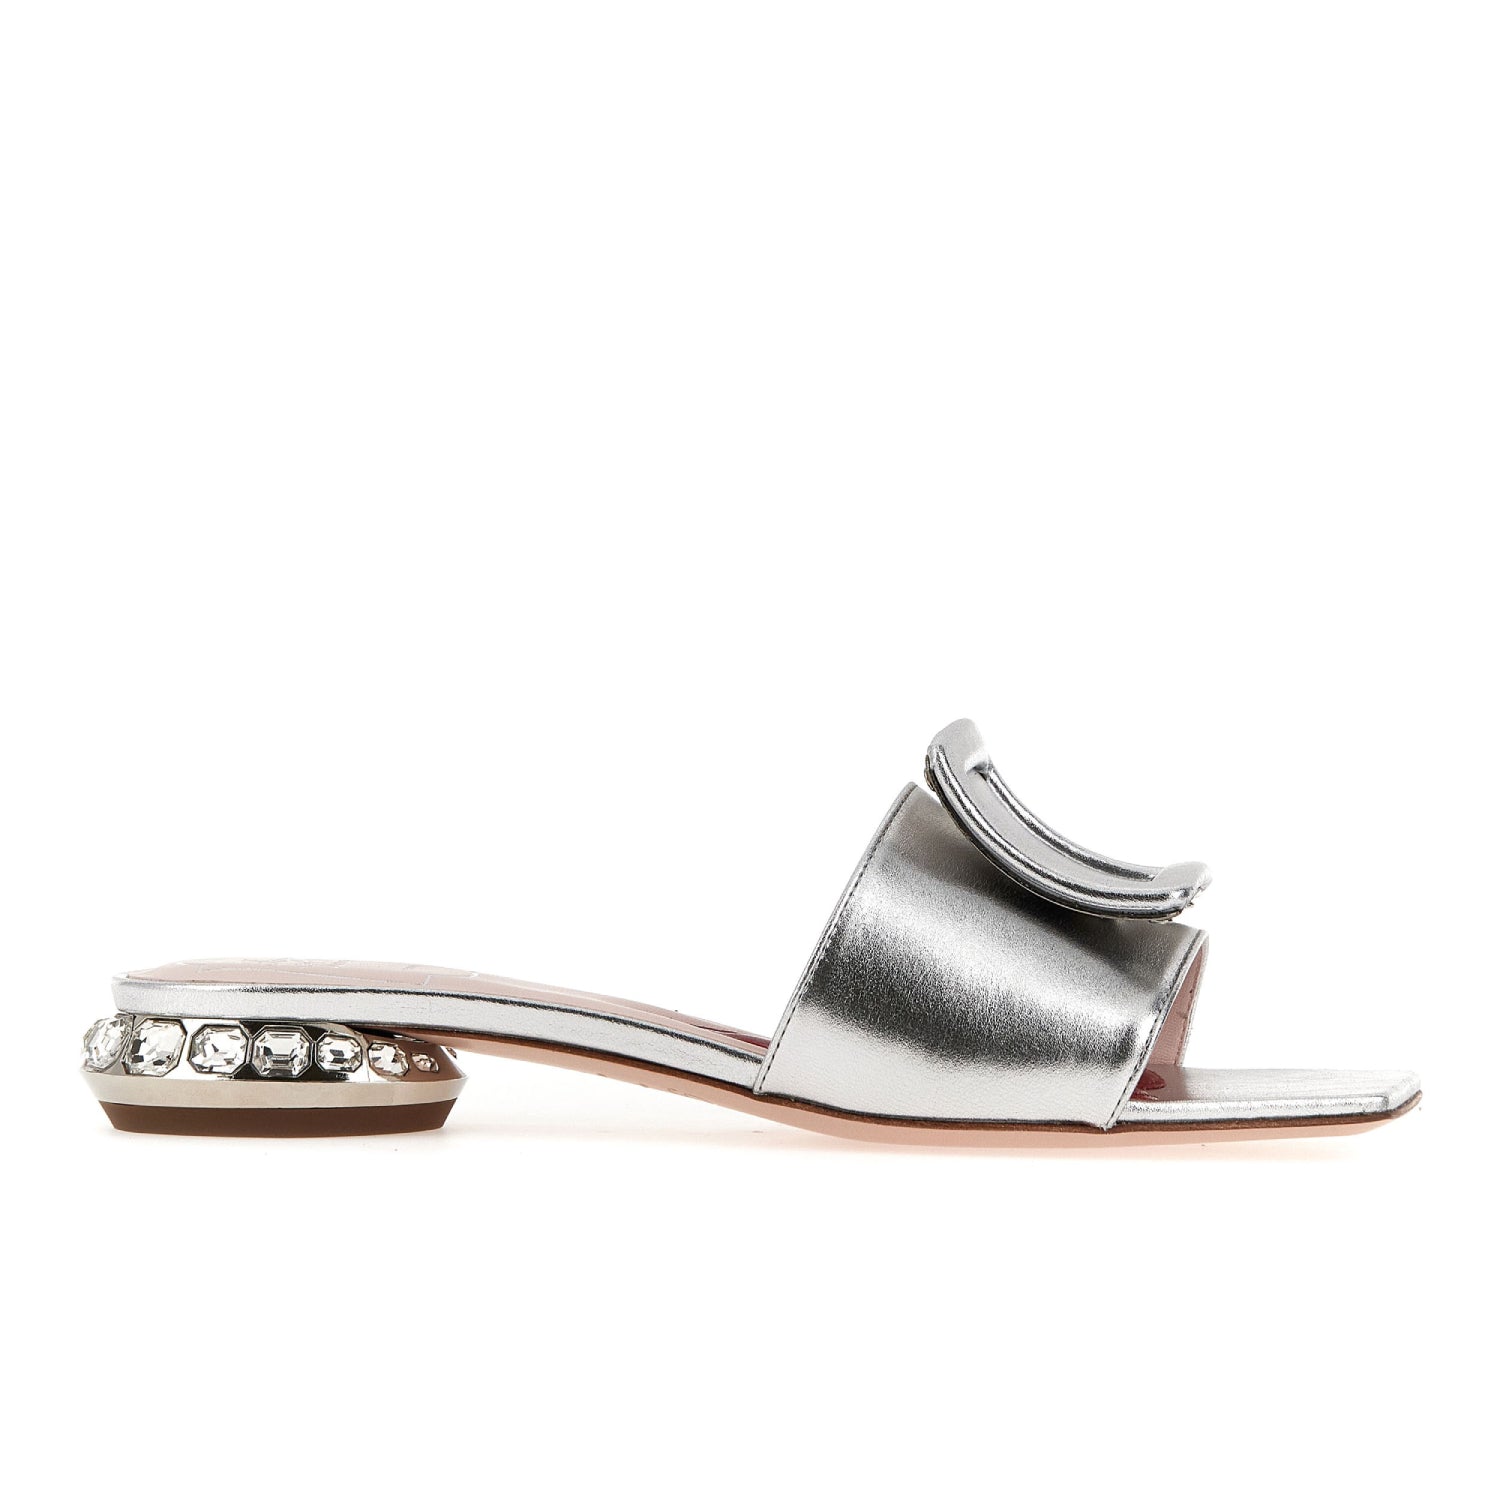 Strass Heel Covered Buckle Mules in Nappa Leather